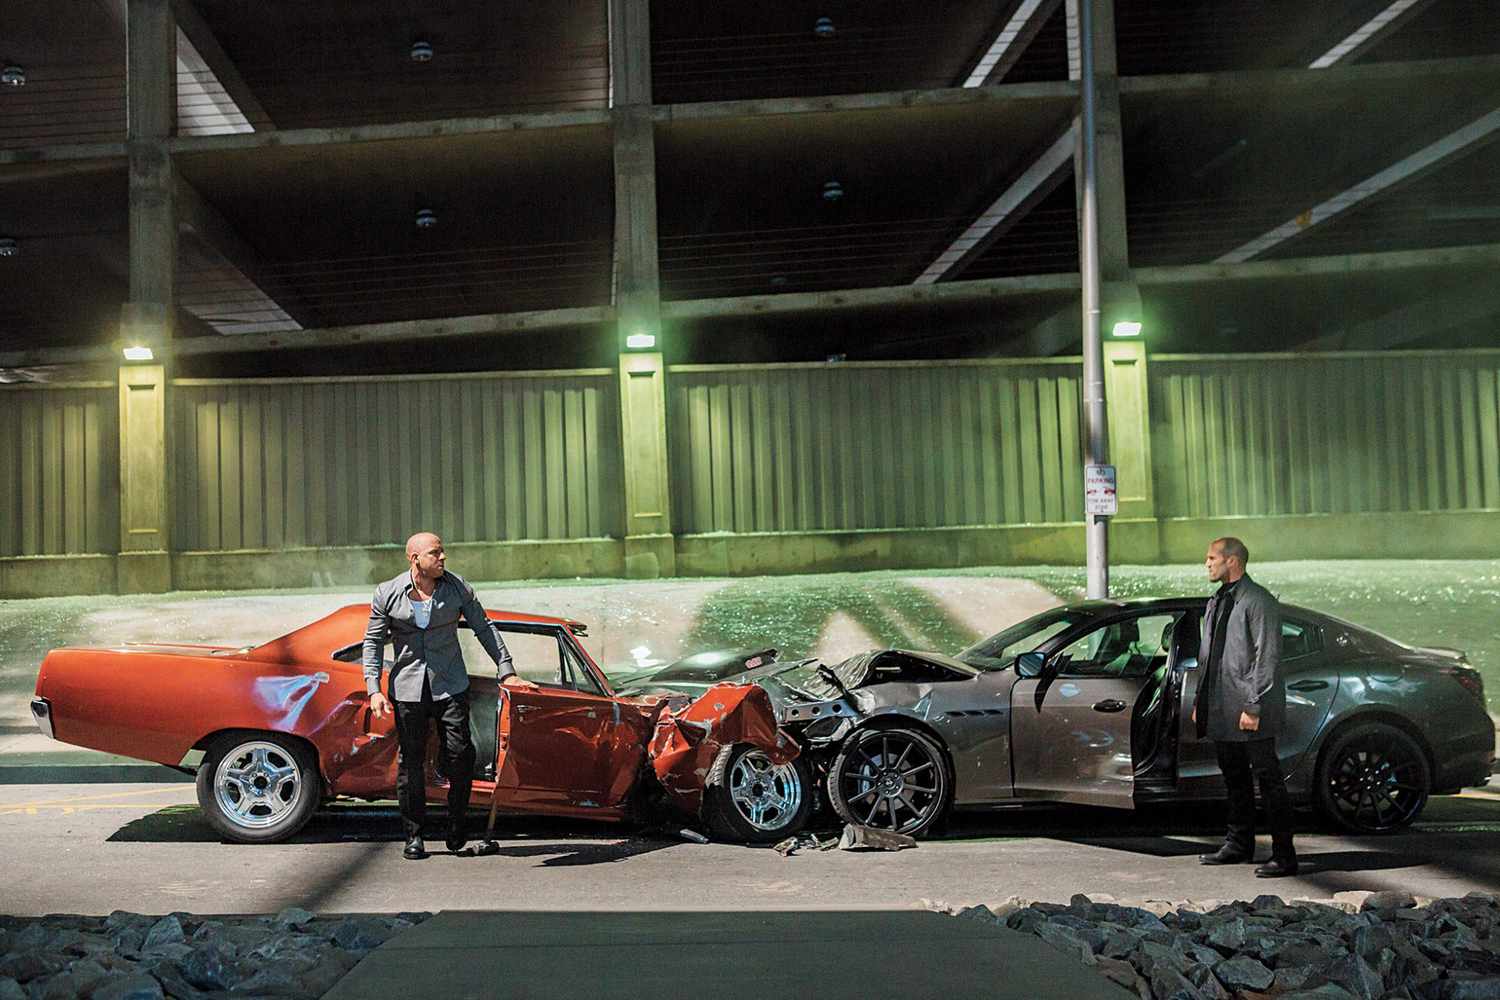 Vin Diesel and Jason Statham in 'Furious 7'